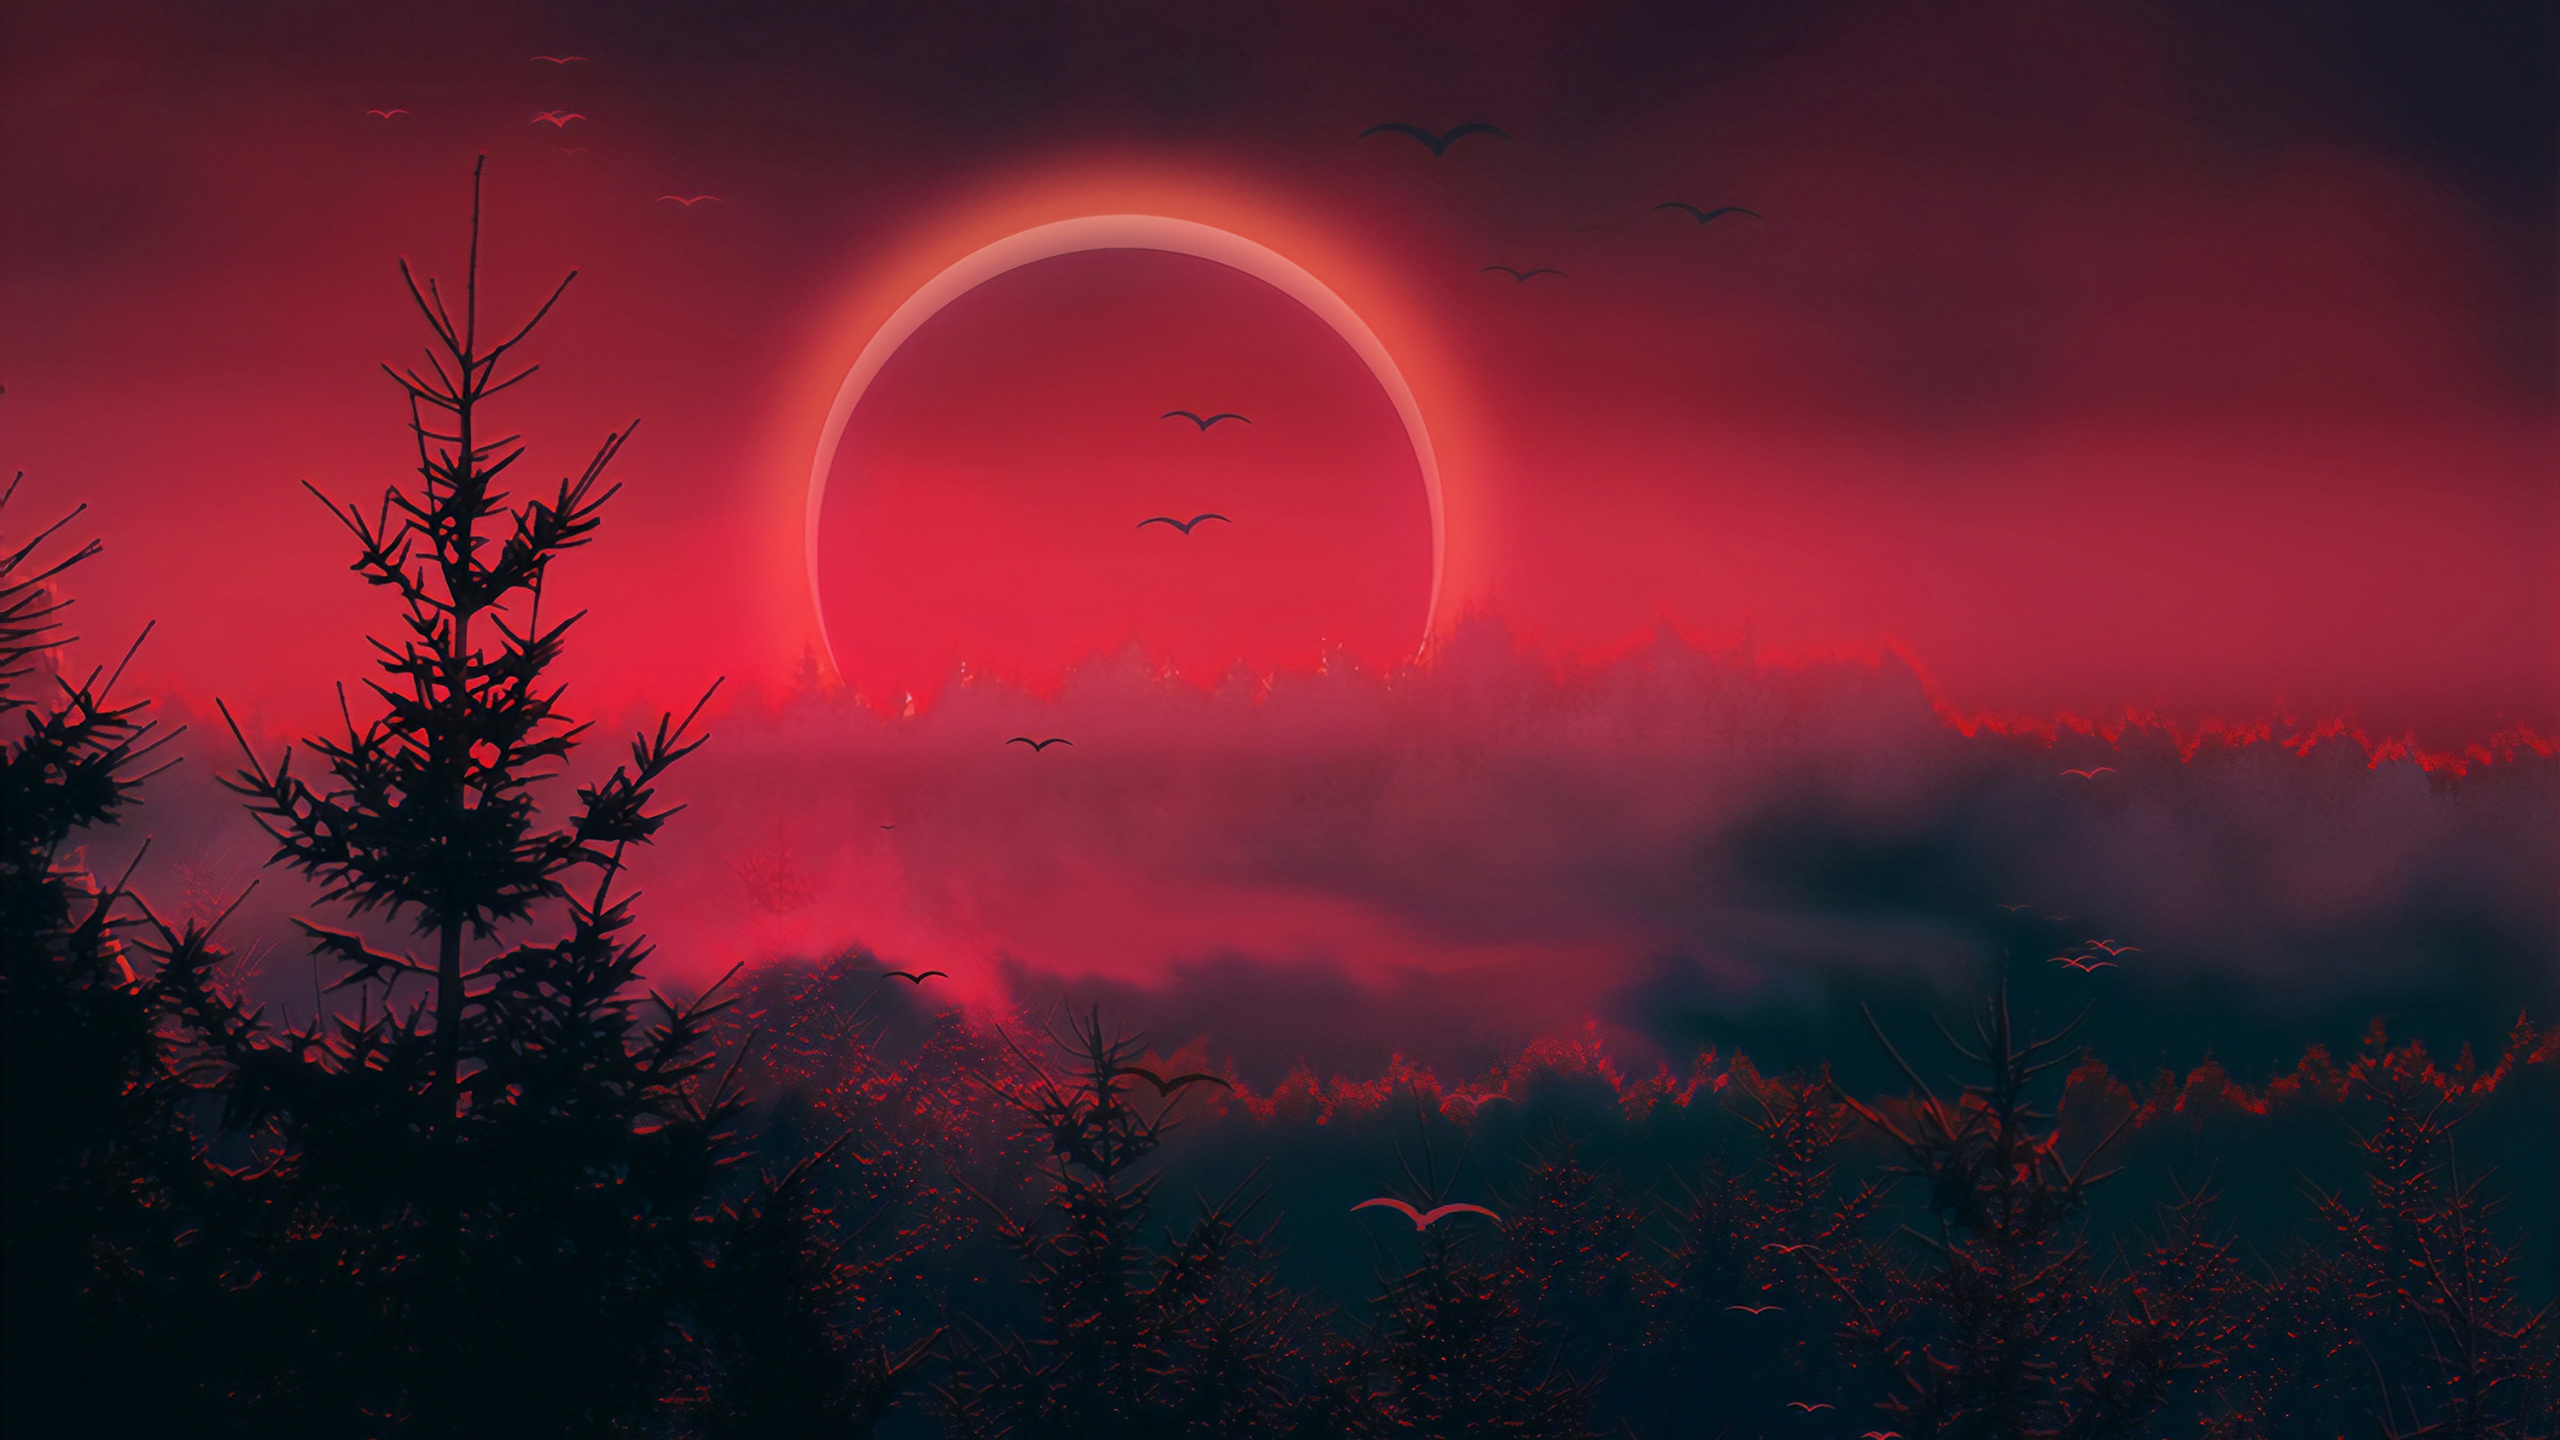 Red, Celestial Event, Atmosphere, Night, Tree. Wallpaper in 2560x1440 Resolution